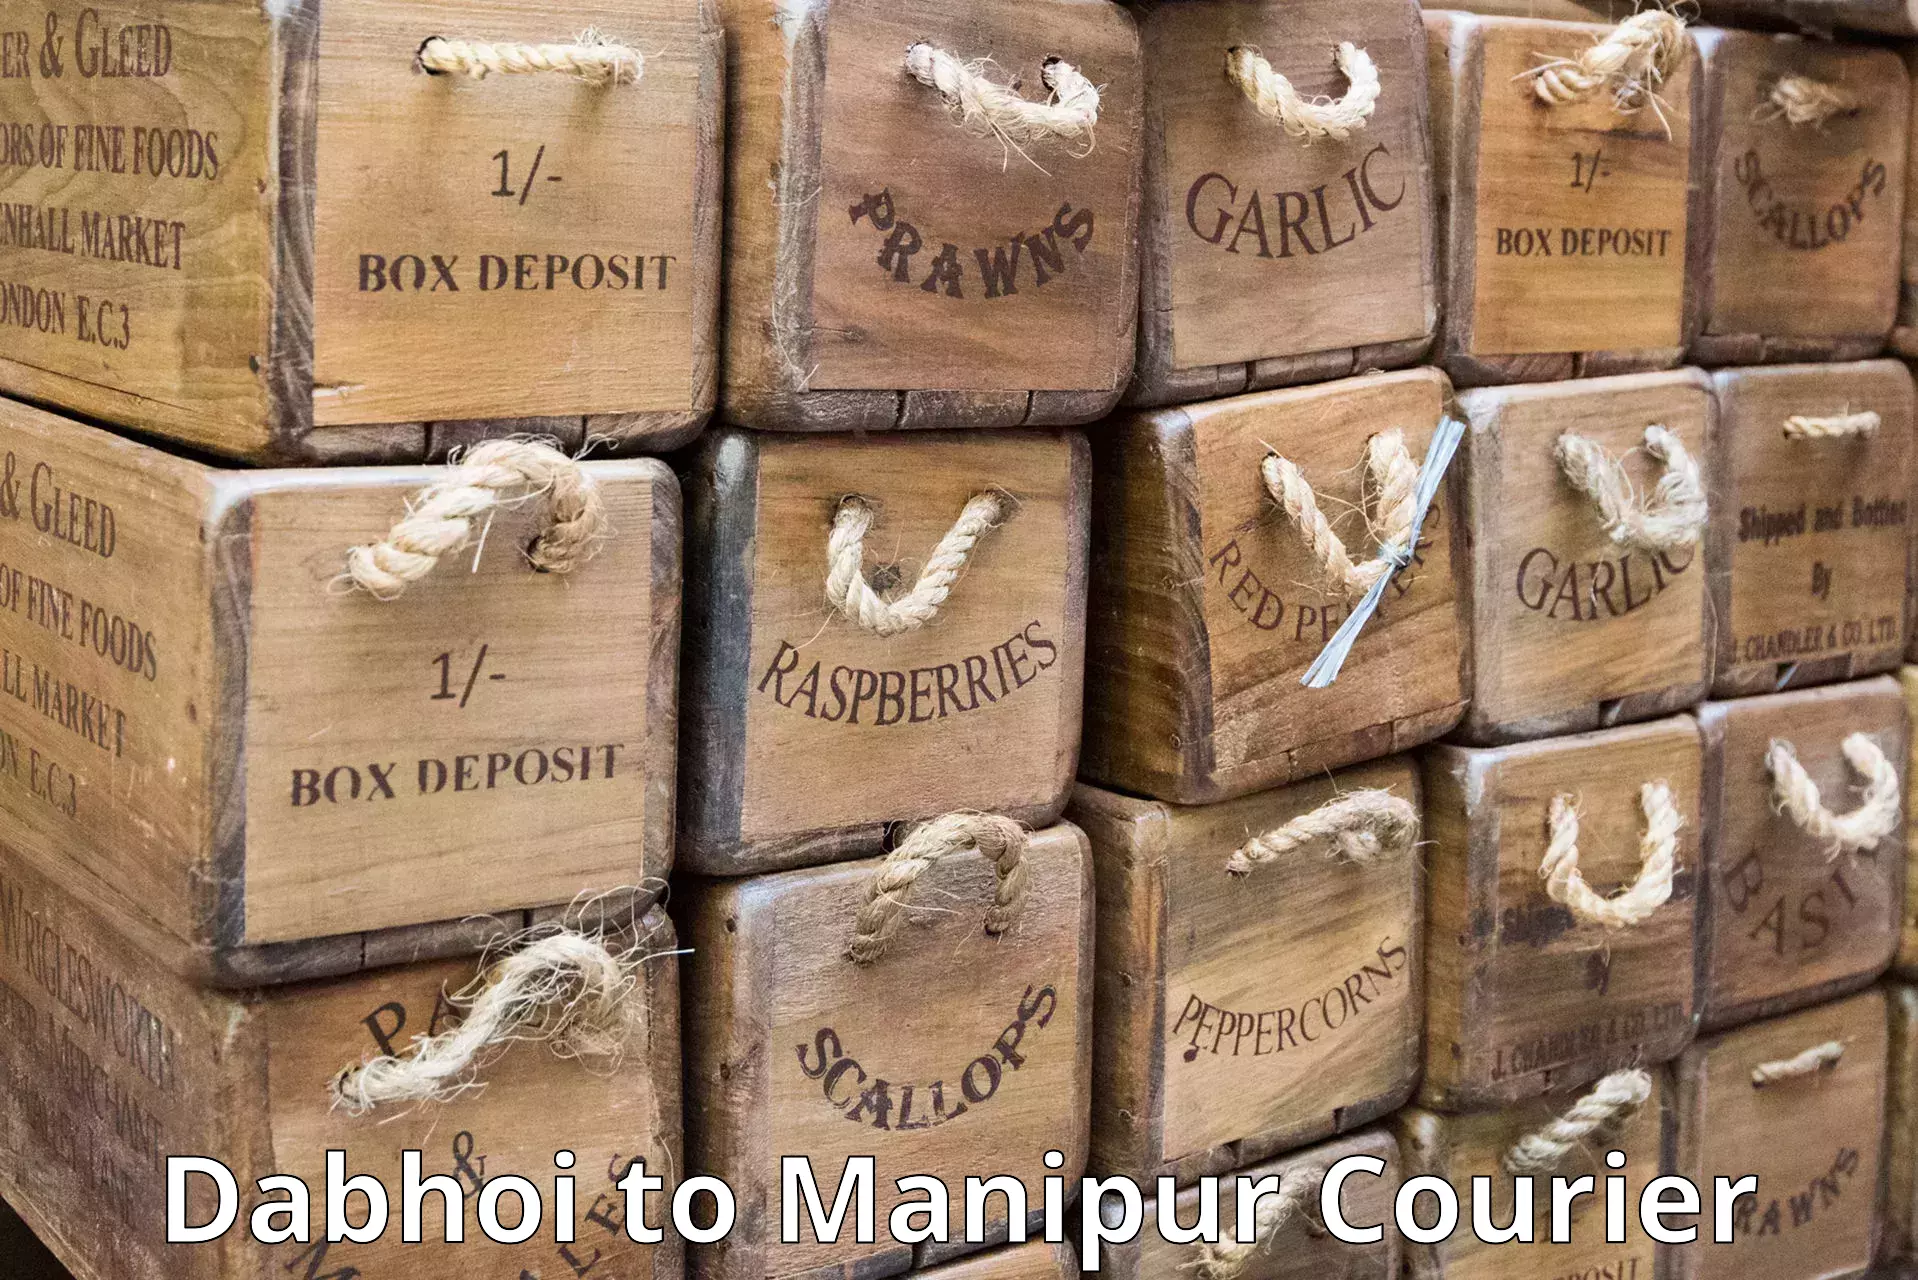 Global shipping networks Dabhoi to Manipur